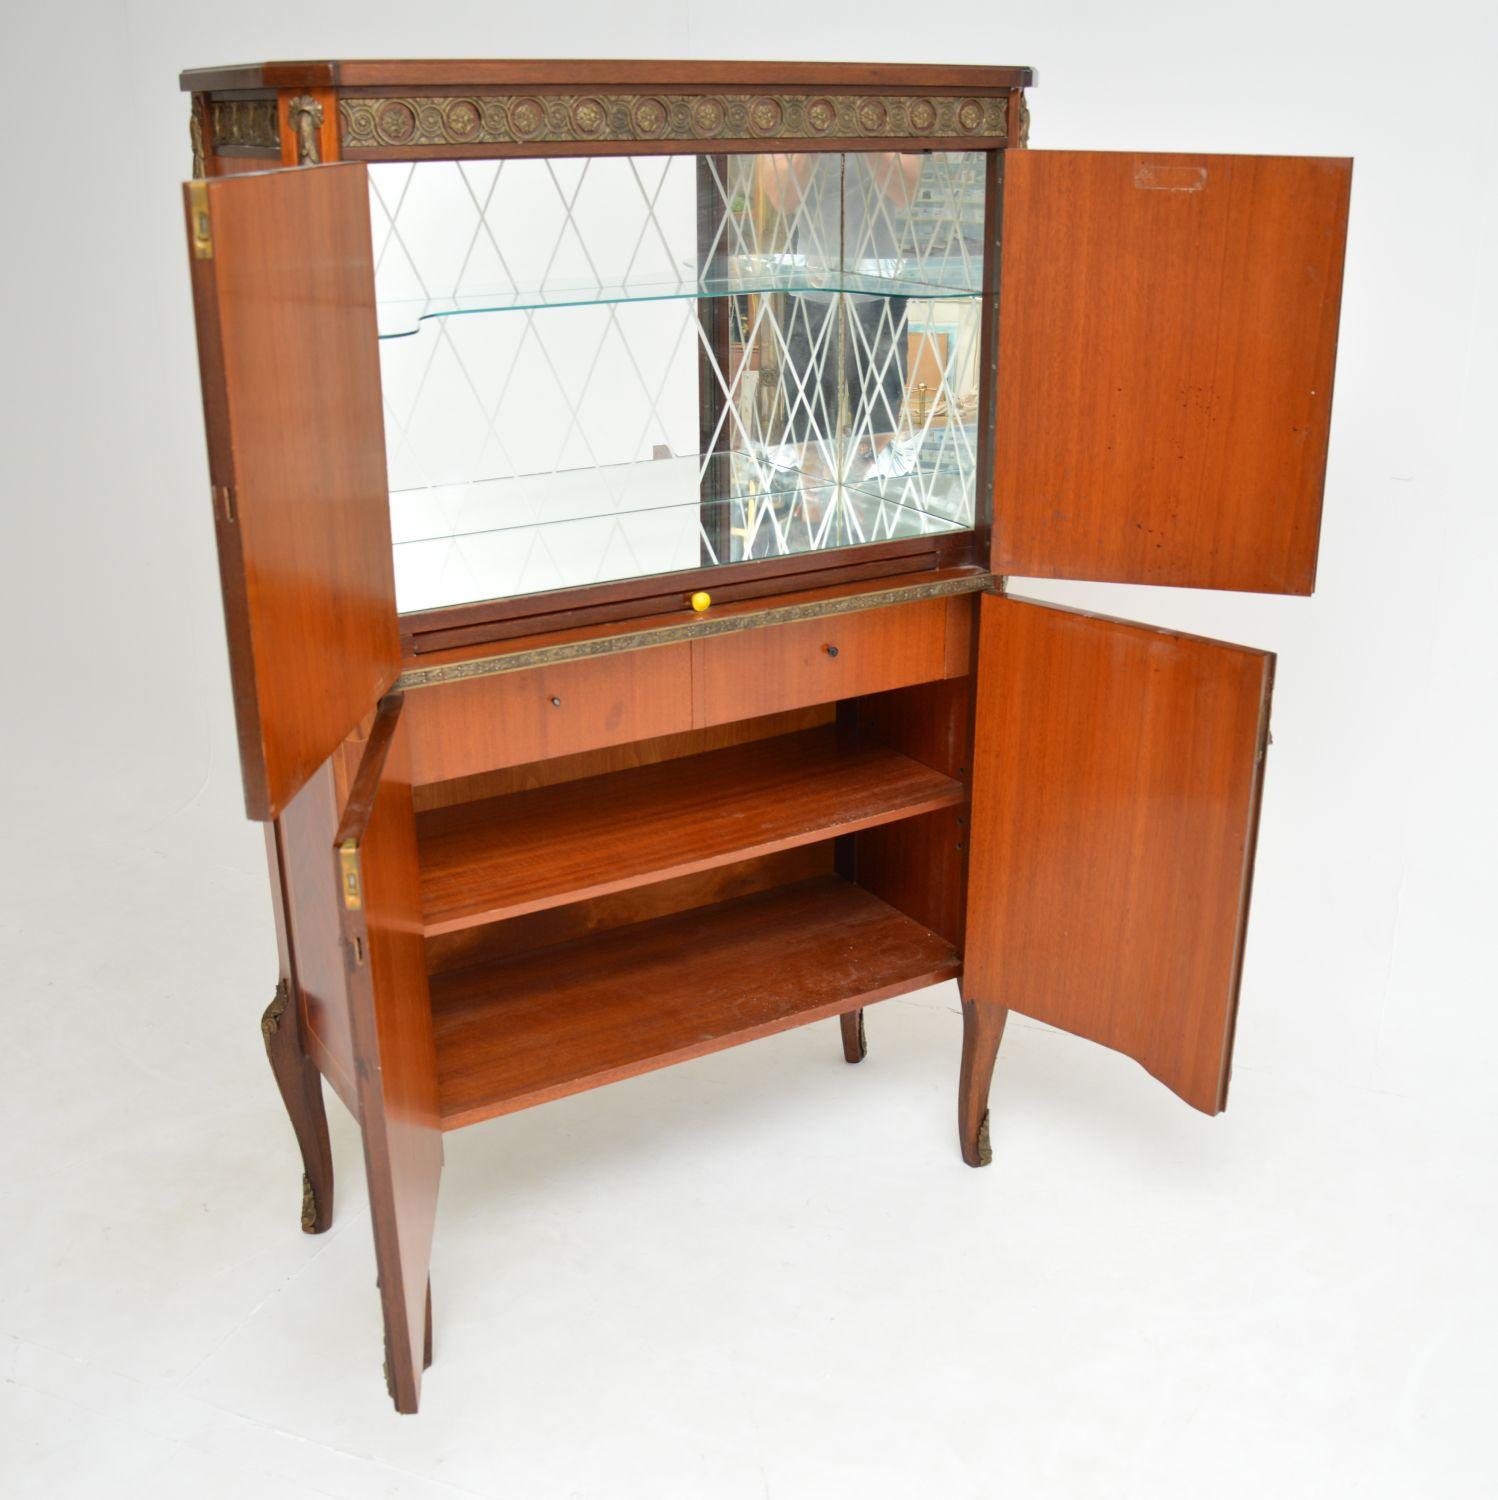 A stunning antique French cocktail drinks cabinet, inlaid with various woods with gilt bronze mounts, dating from around the 1930’s.

The quality is fantastic, this is extremely well made and exquisitely decorated. It is made from walnut and